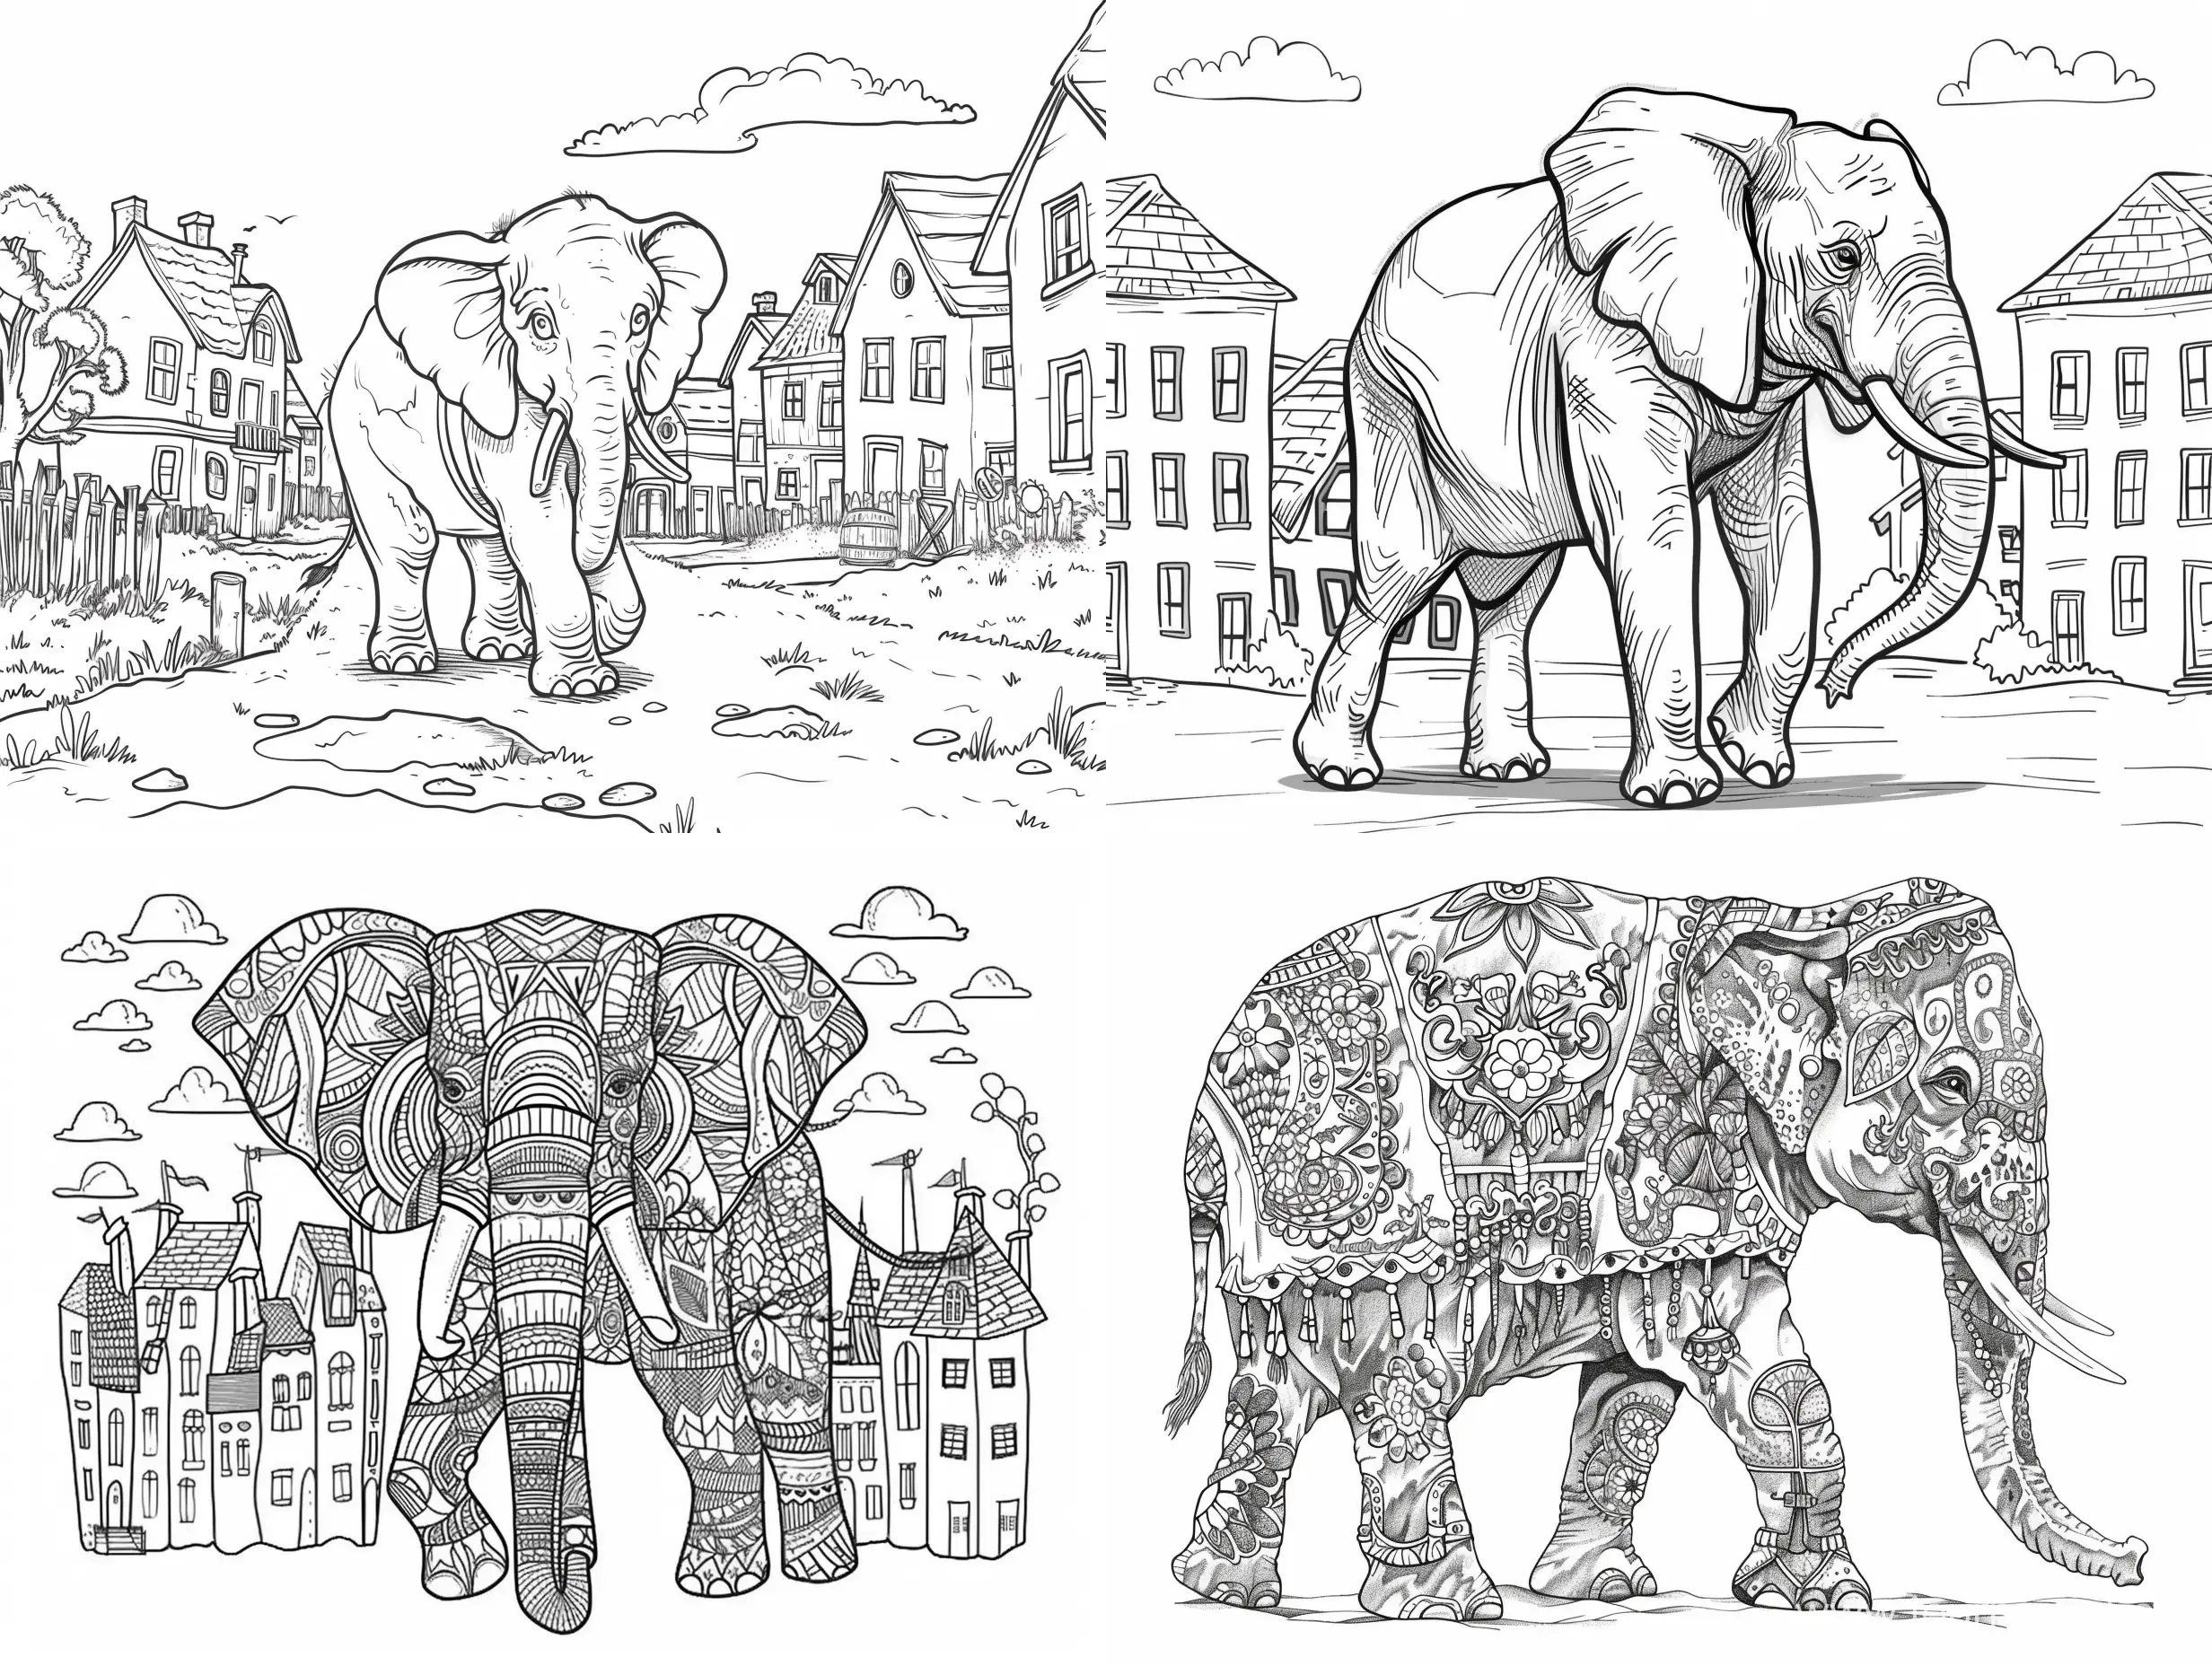 Funny-Cartoon-Elephant-Coloring-Page-for-Kids-in-Detailed-Isolated-Town-Scene